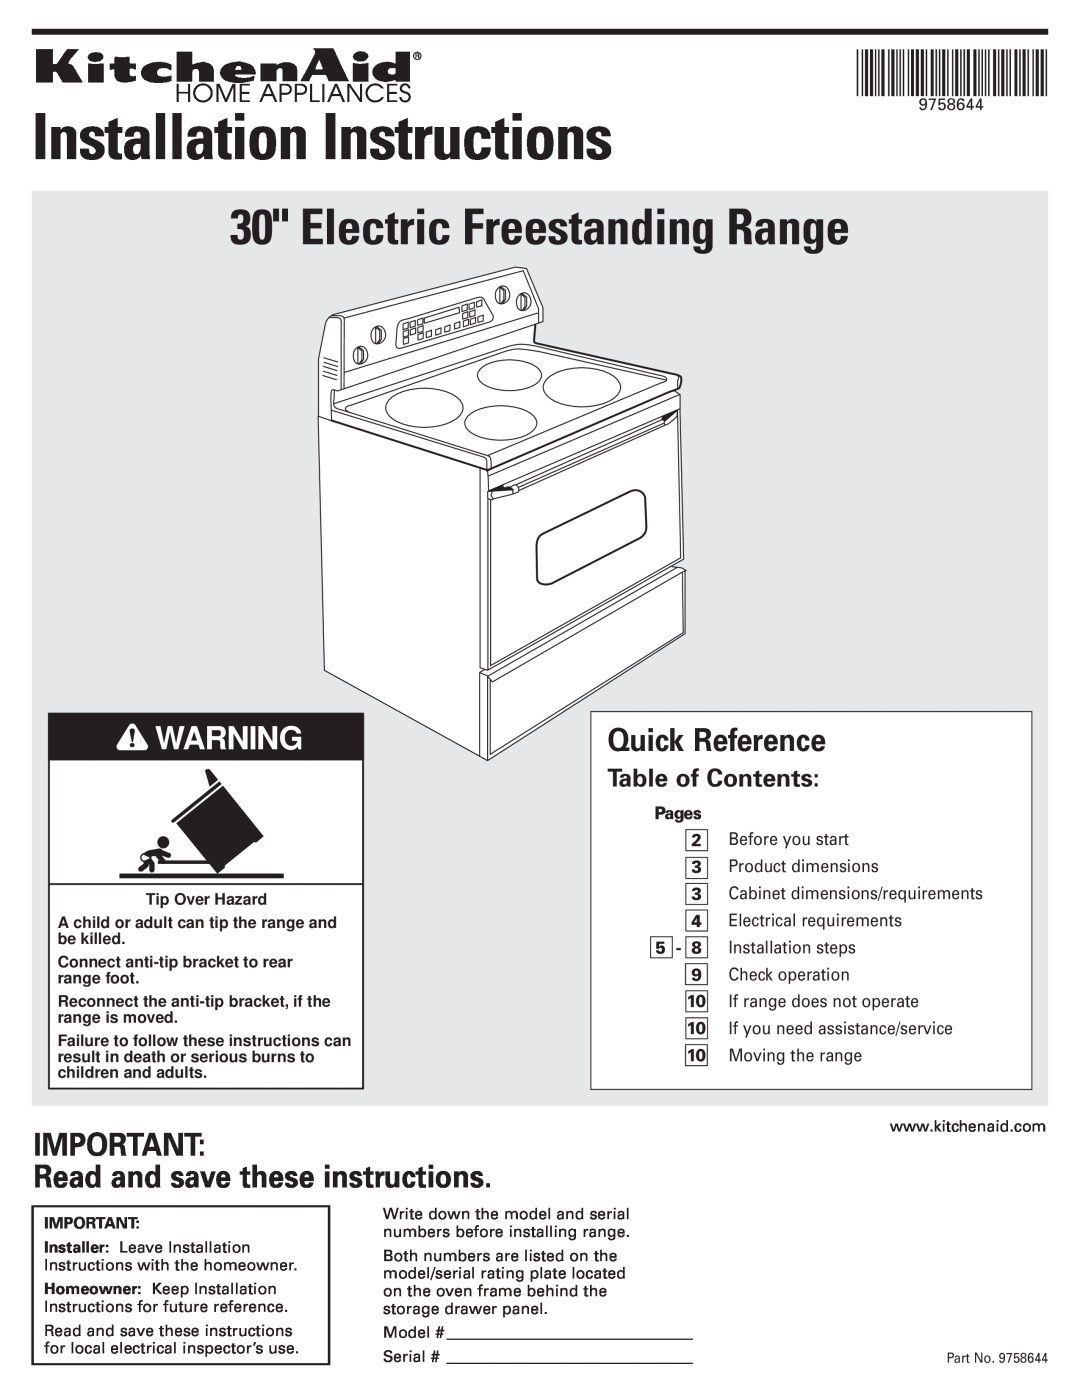 KitchenAid 9.76E+13 installation instructions Table of Contents, Connect anti-tip bracket to rear range foot, Pages 